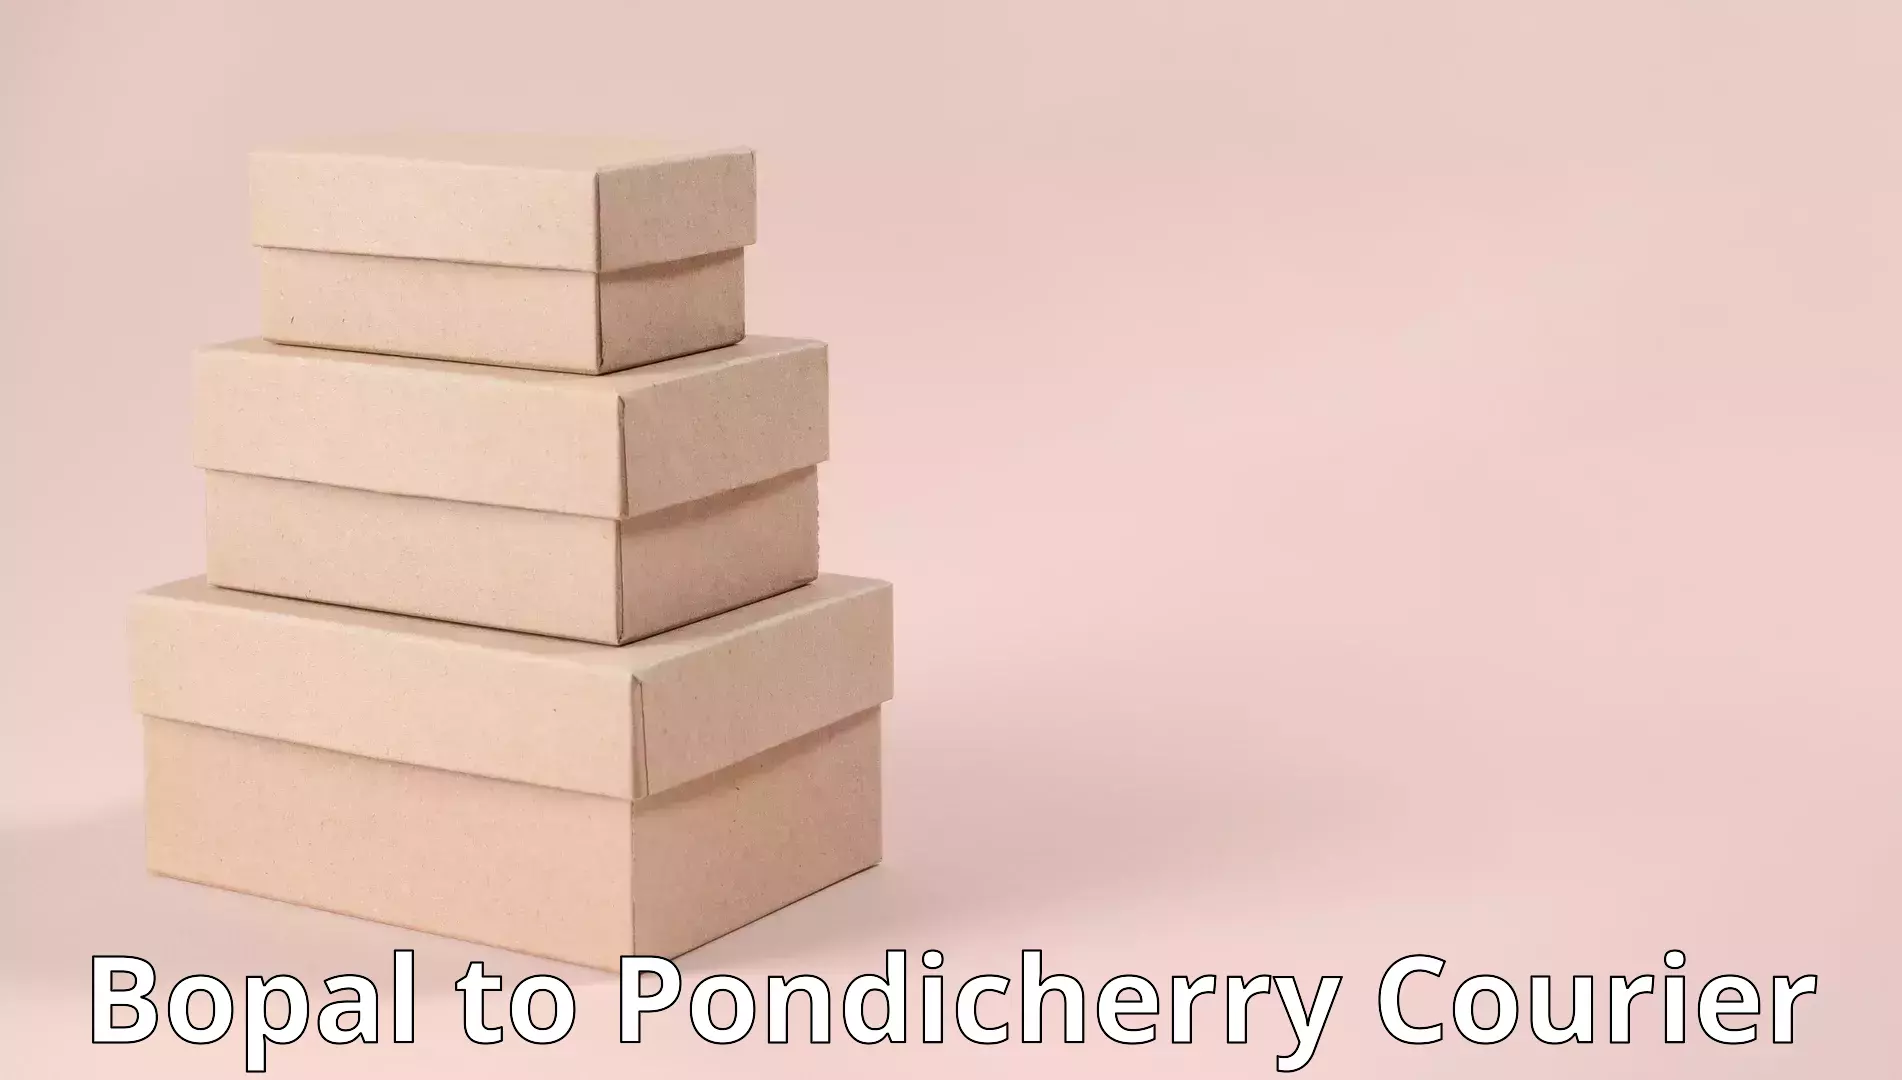 Home relocation experts Bopal to Pondicherry University